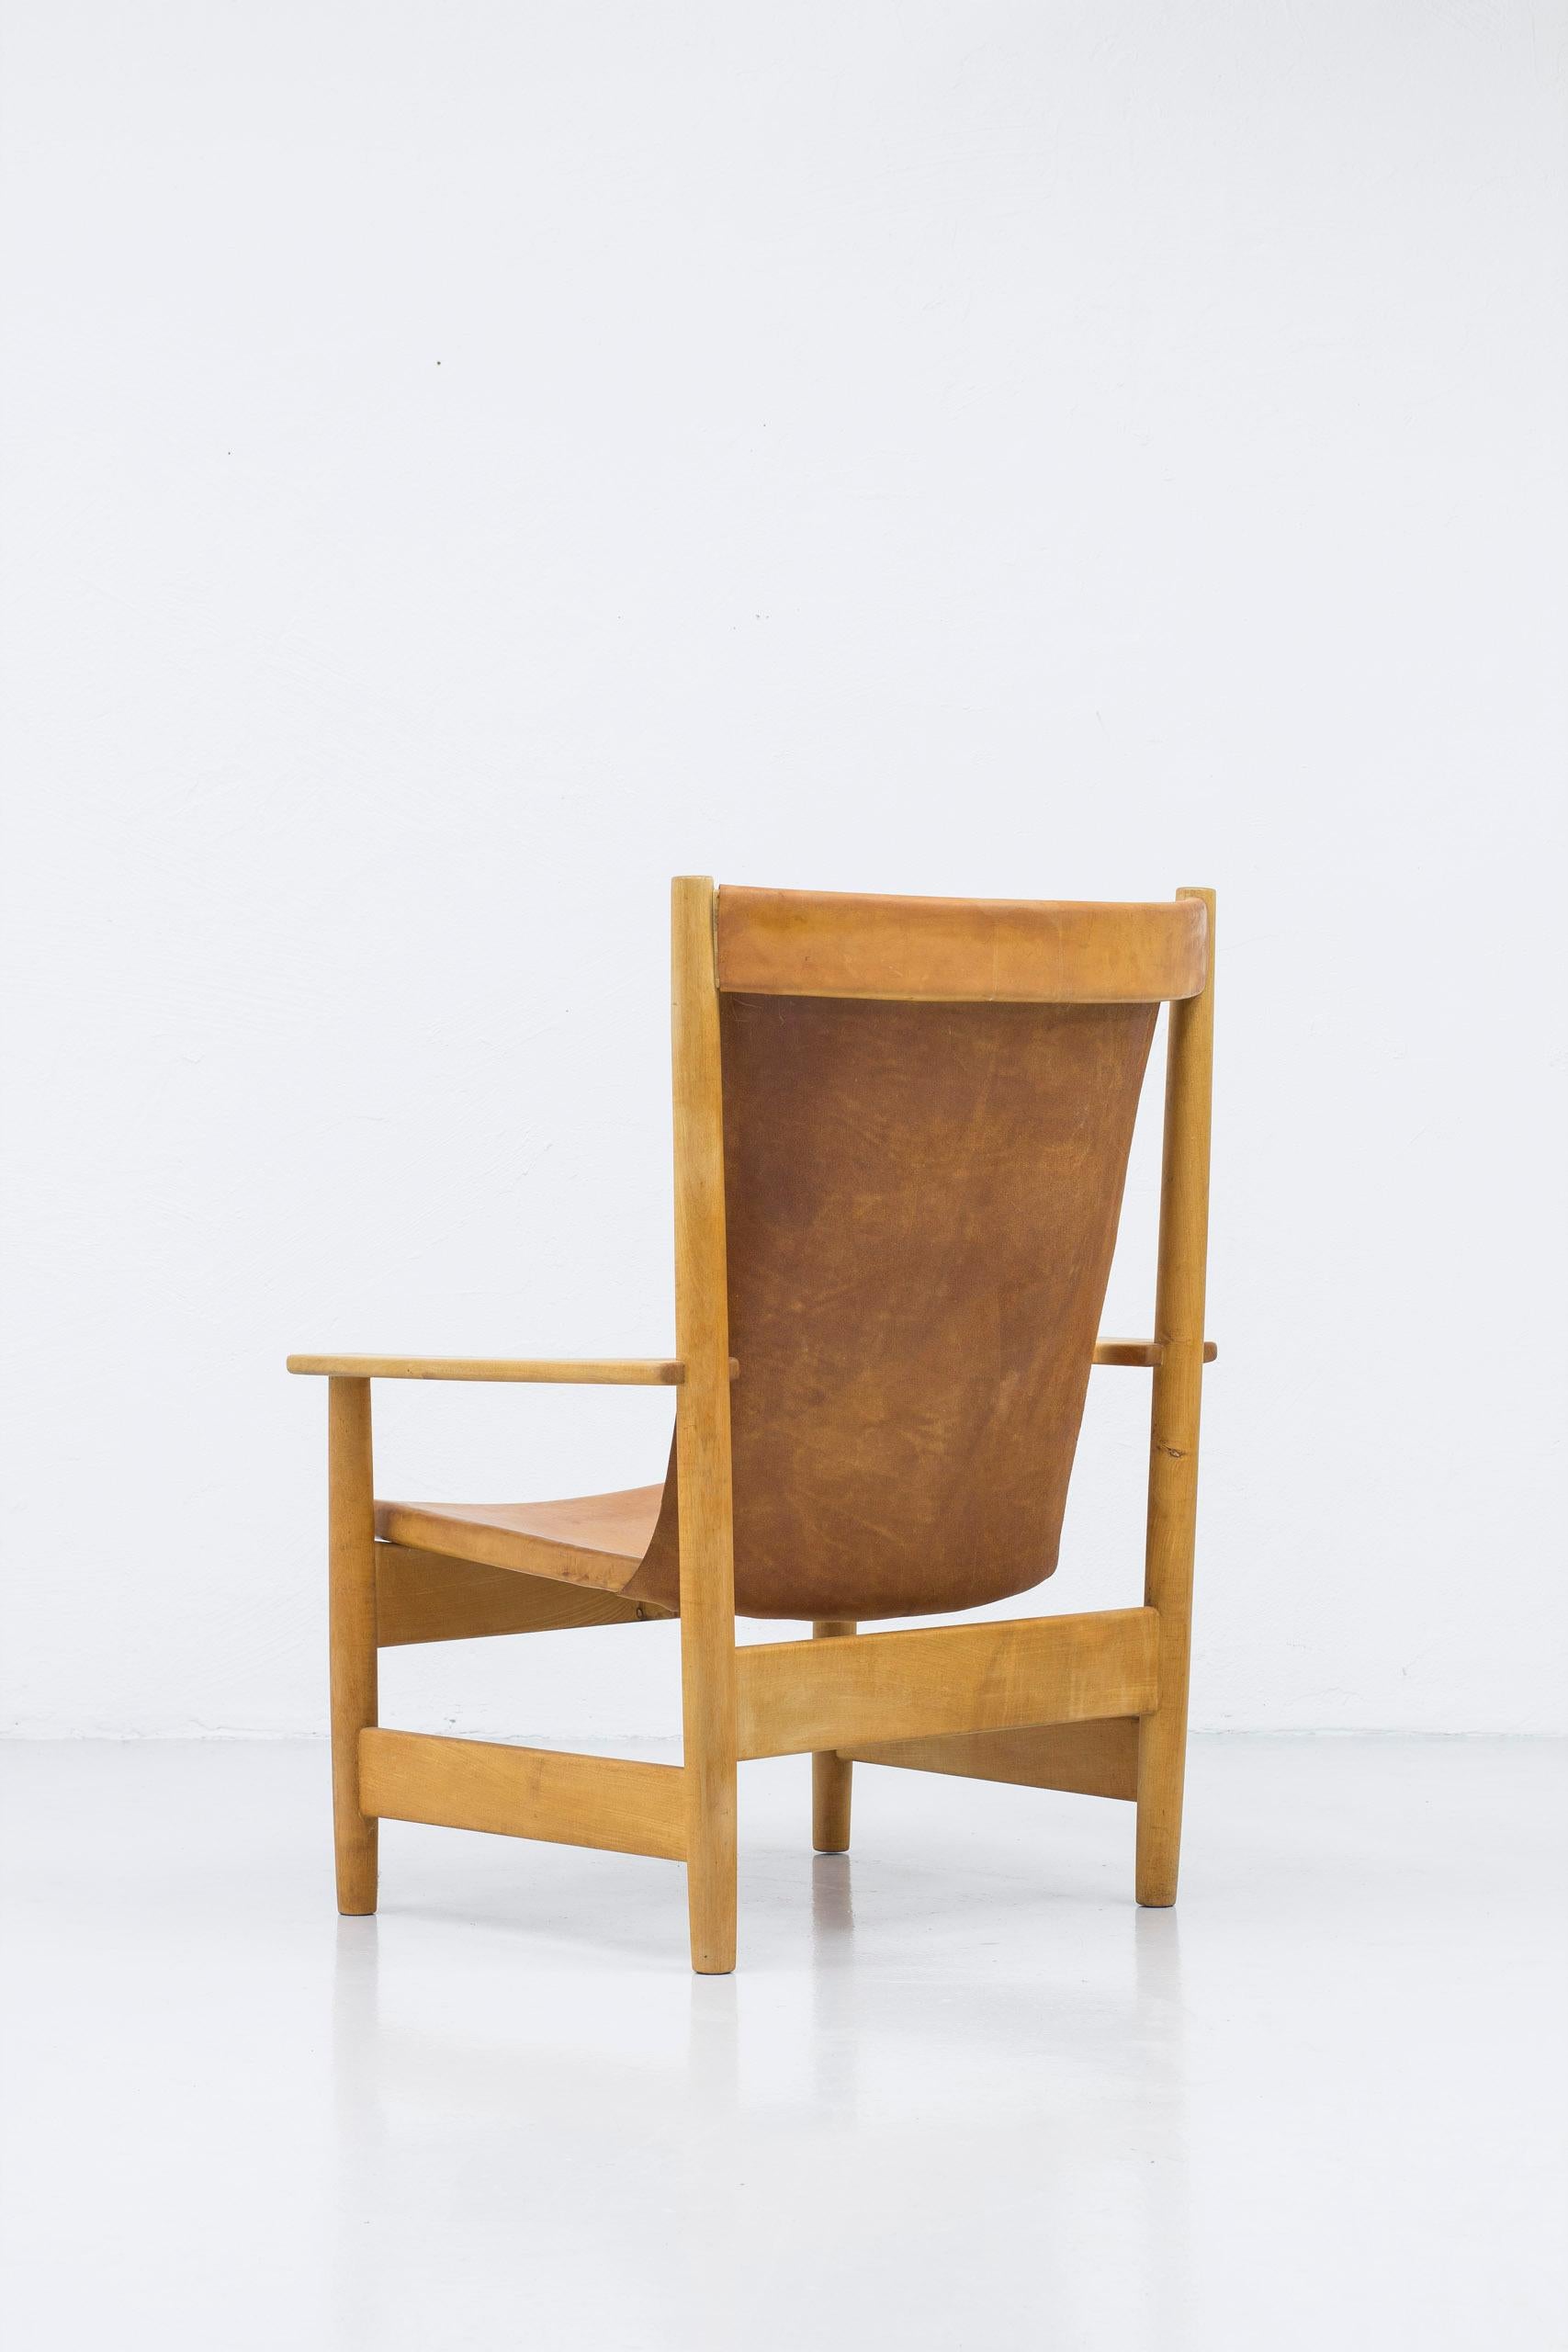 Mid-20th Century Swedish Modern Cognac Leather Lounge Chair, Patina, Sweden, 1950s For Sale